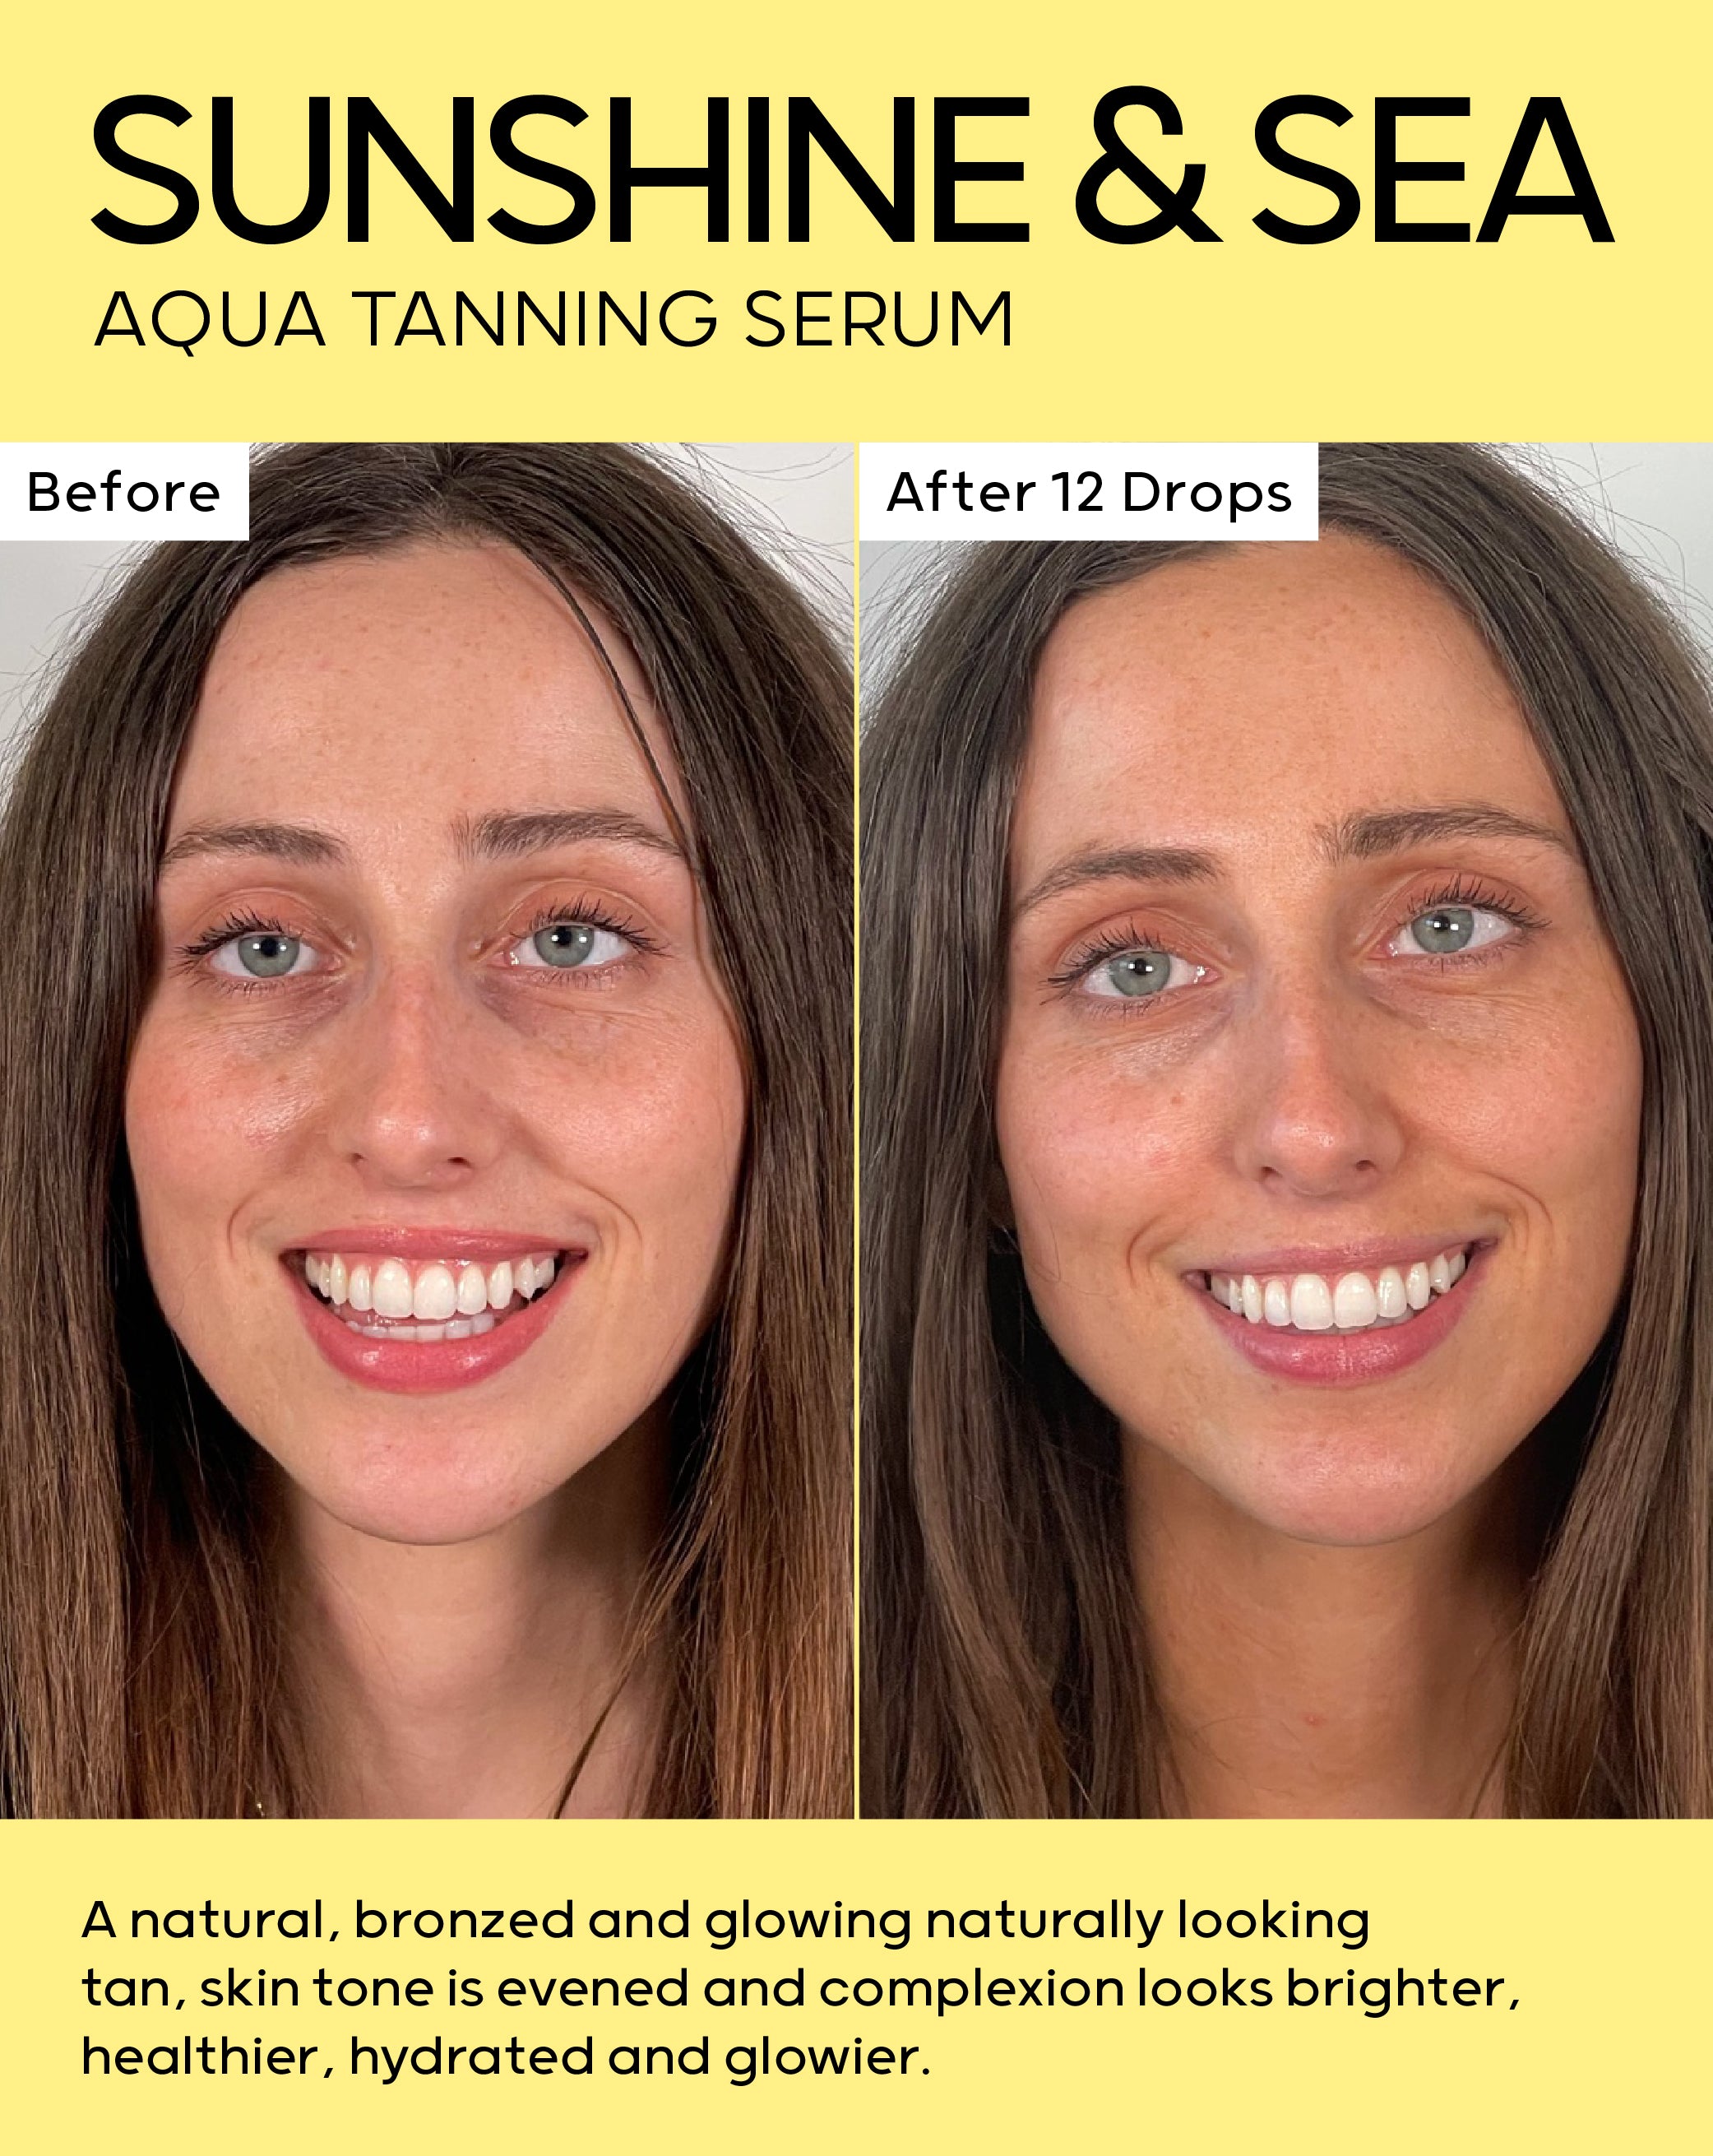 Skin tone is evened and complexion looks brighter after 12 drops of tanning serum